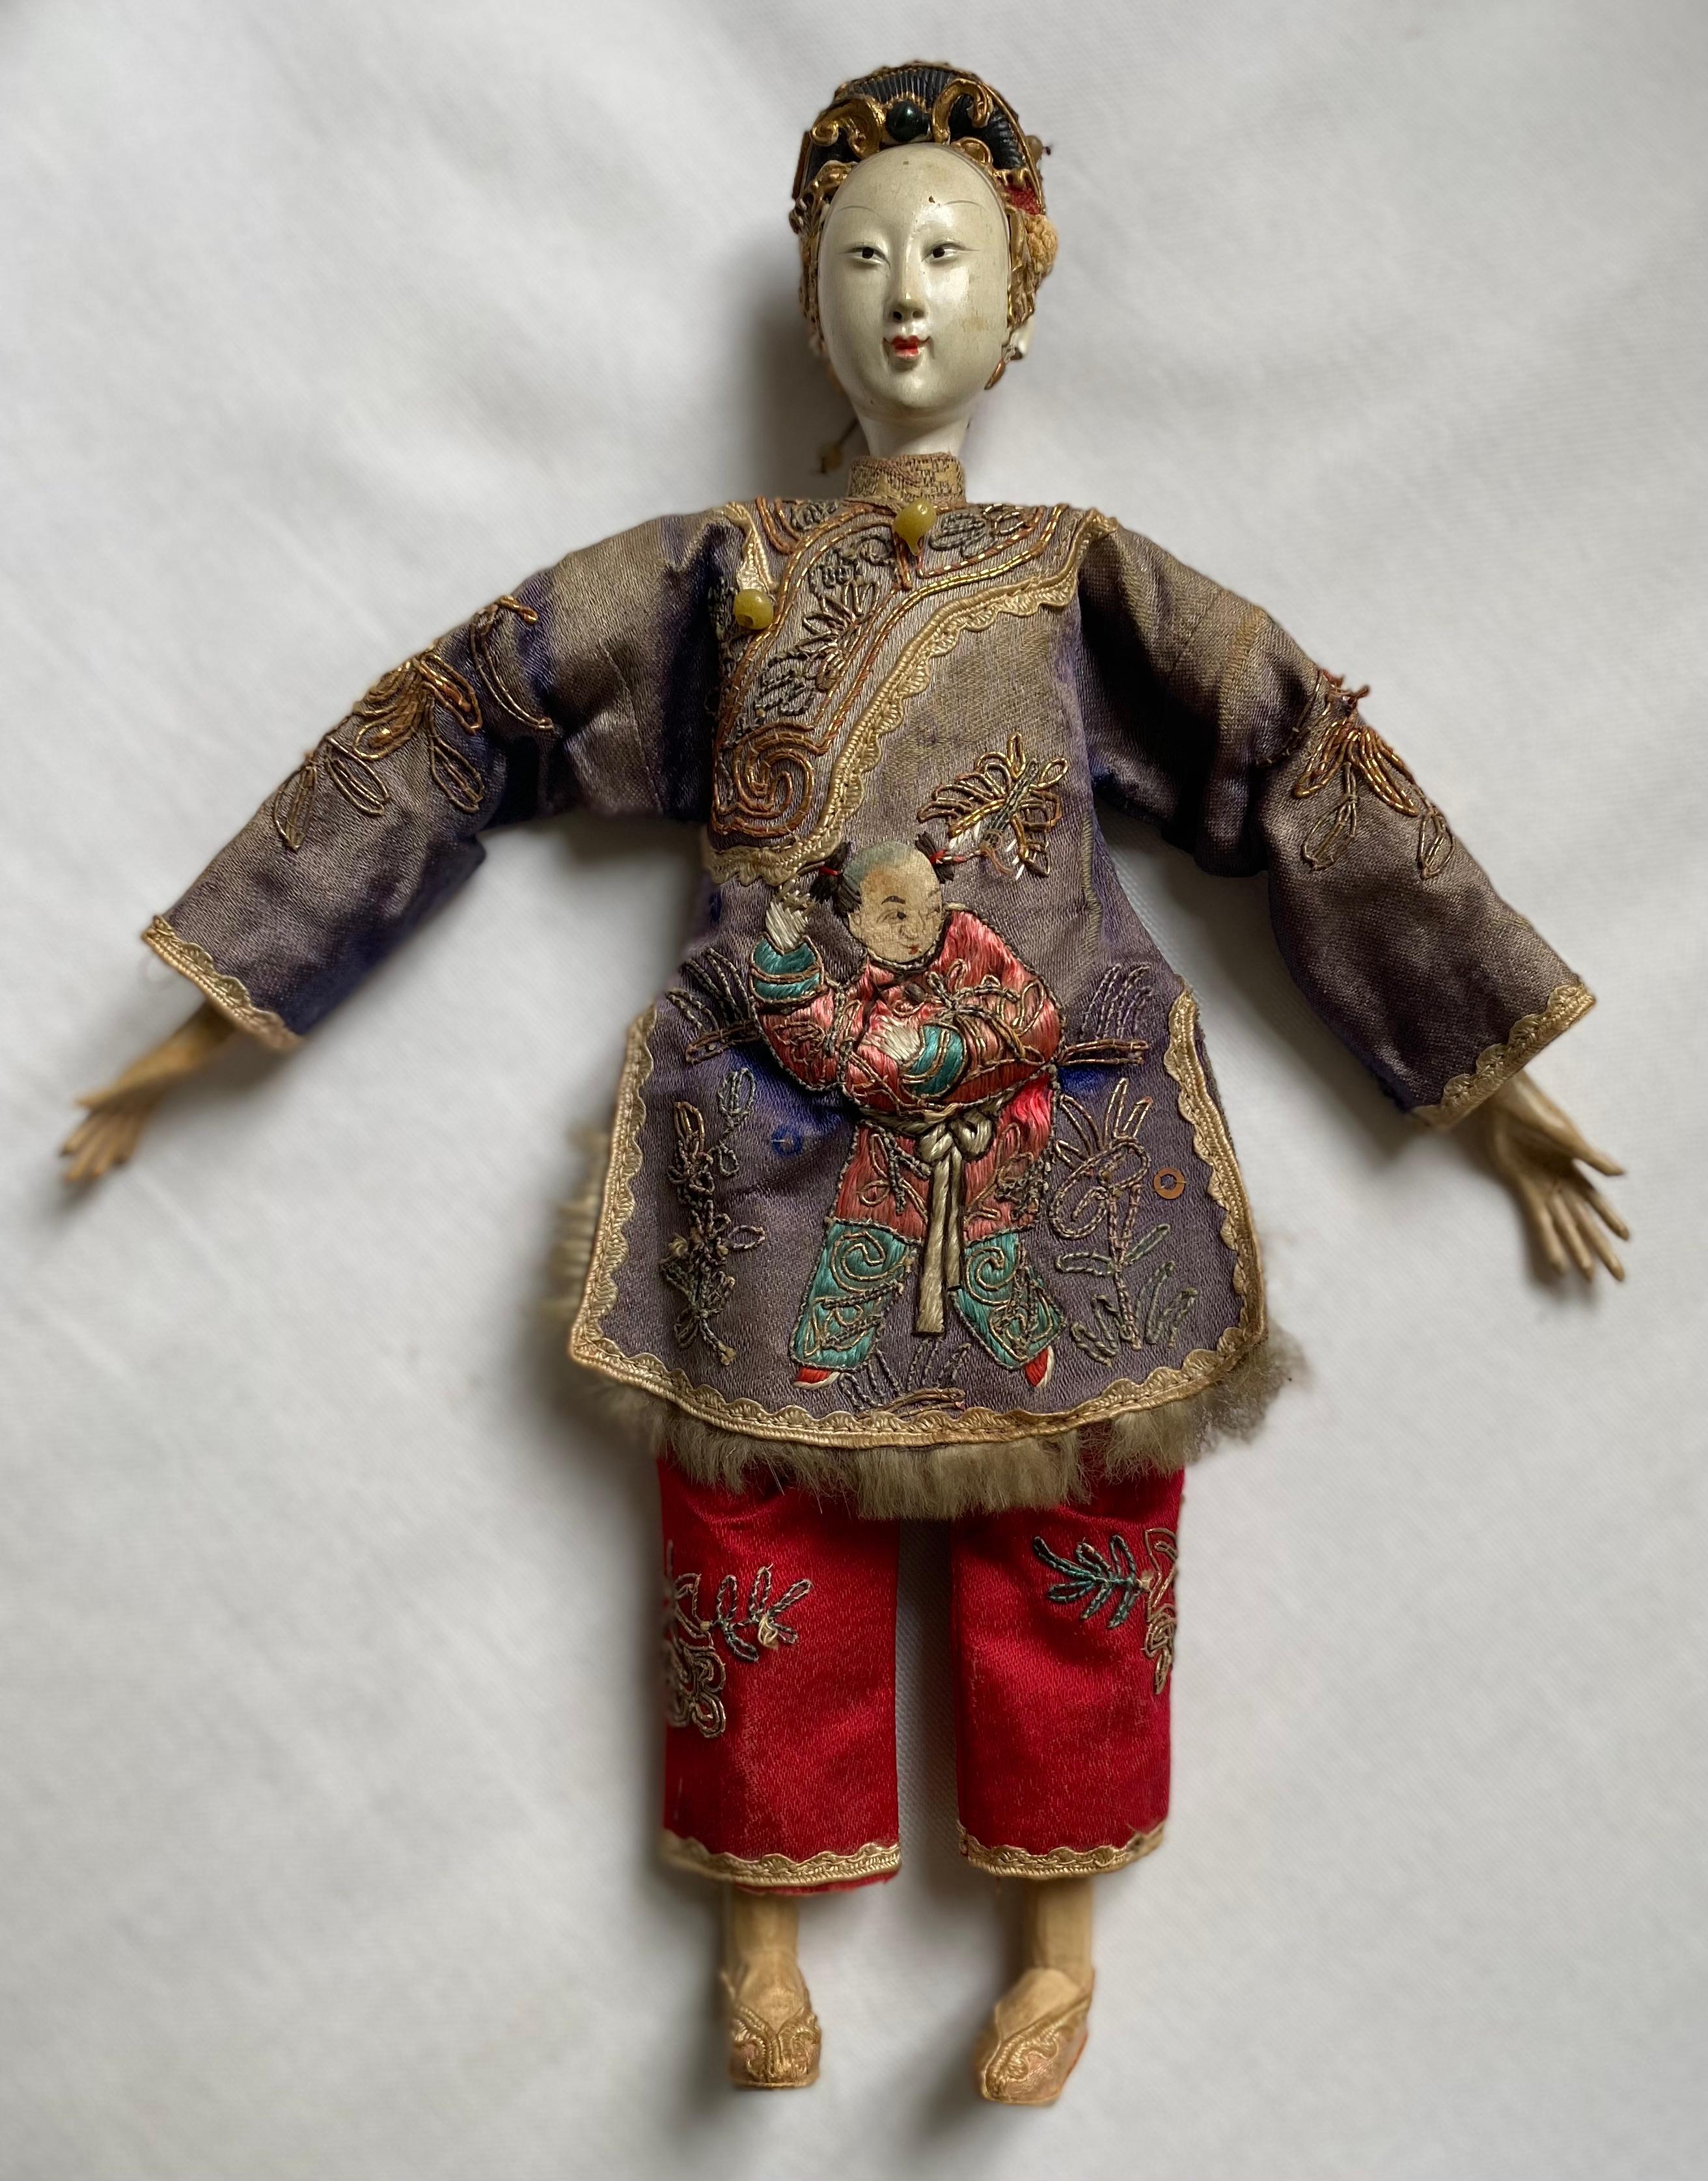 2 antique Chinese dolls, from the Qing Dynasty.

These dolls were handcrafted in the Chaozhou region around 1880

The dolls have a wooden torso, movable arms and legs, and are made of sheet iron.

The feet are made of wood, the hands are made